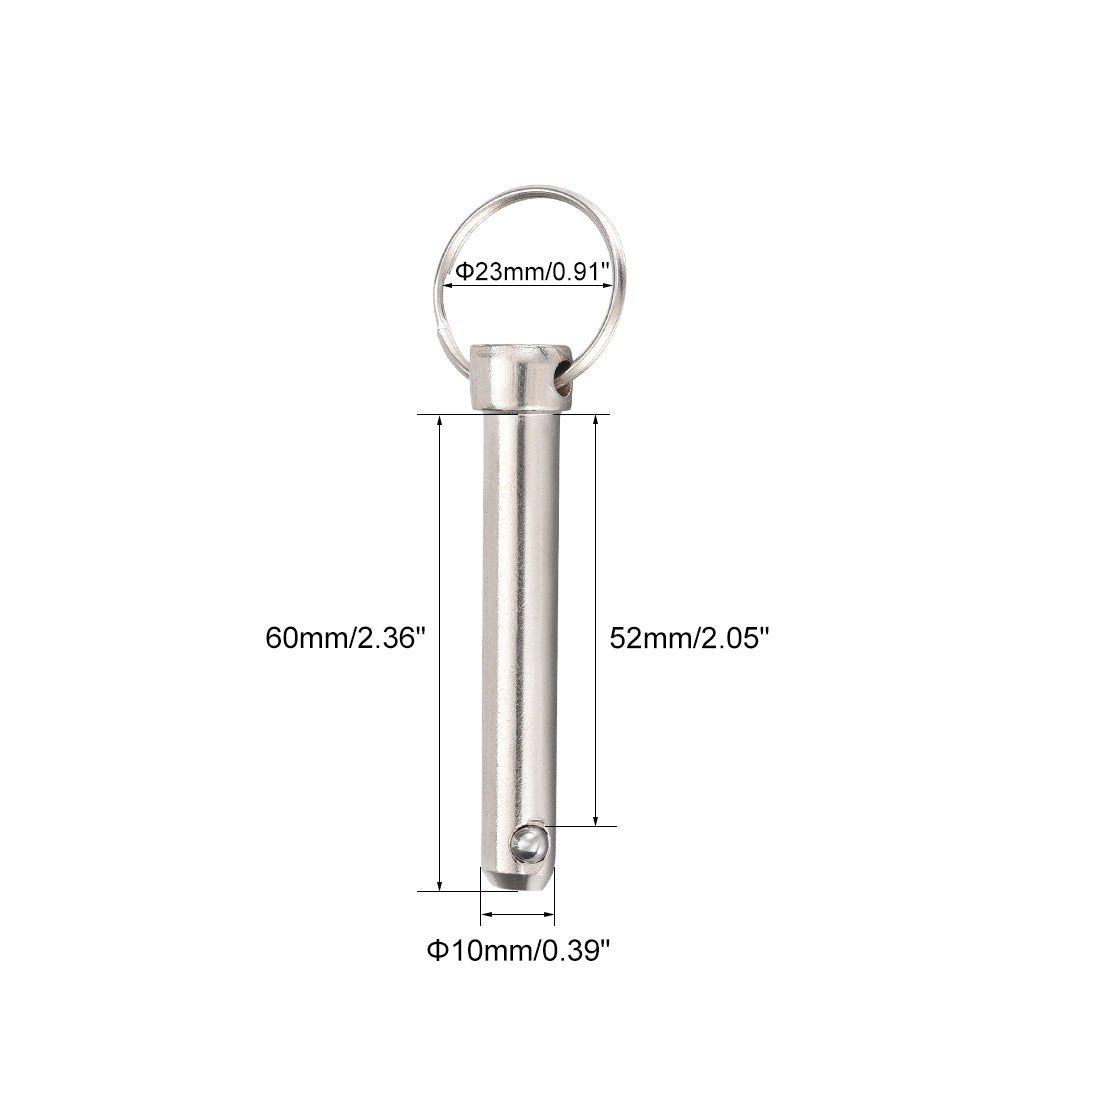 Uxcell Uxcell Quick Release Pin 8mmX70mm Marine Hardware for Boat Bimini Top Deck Hinge 4Pcs